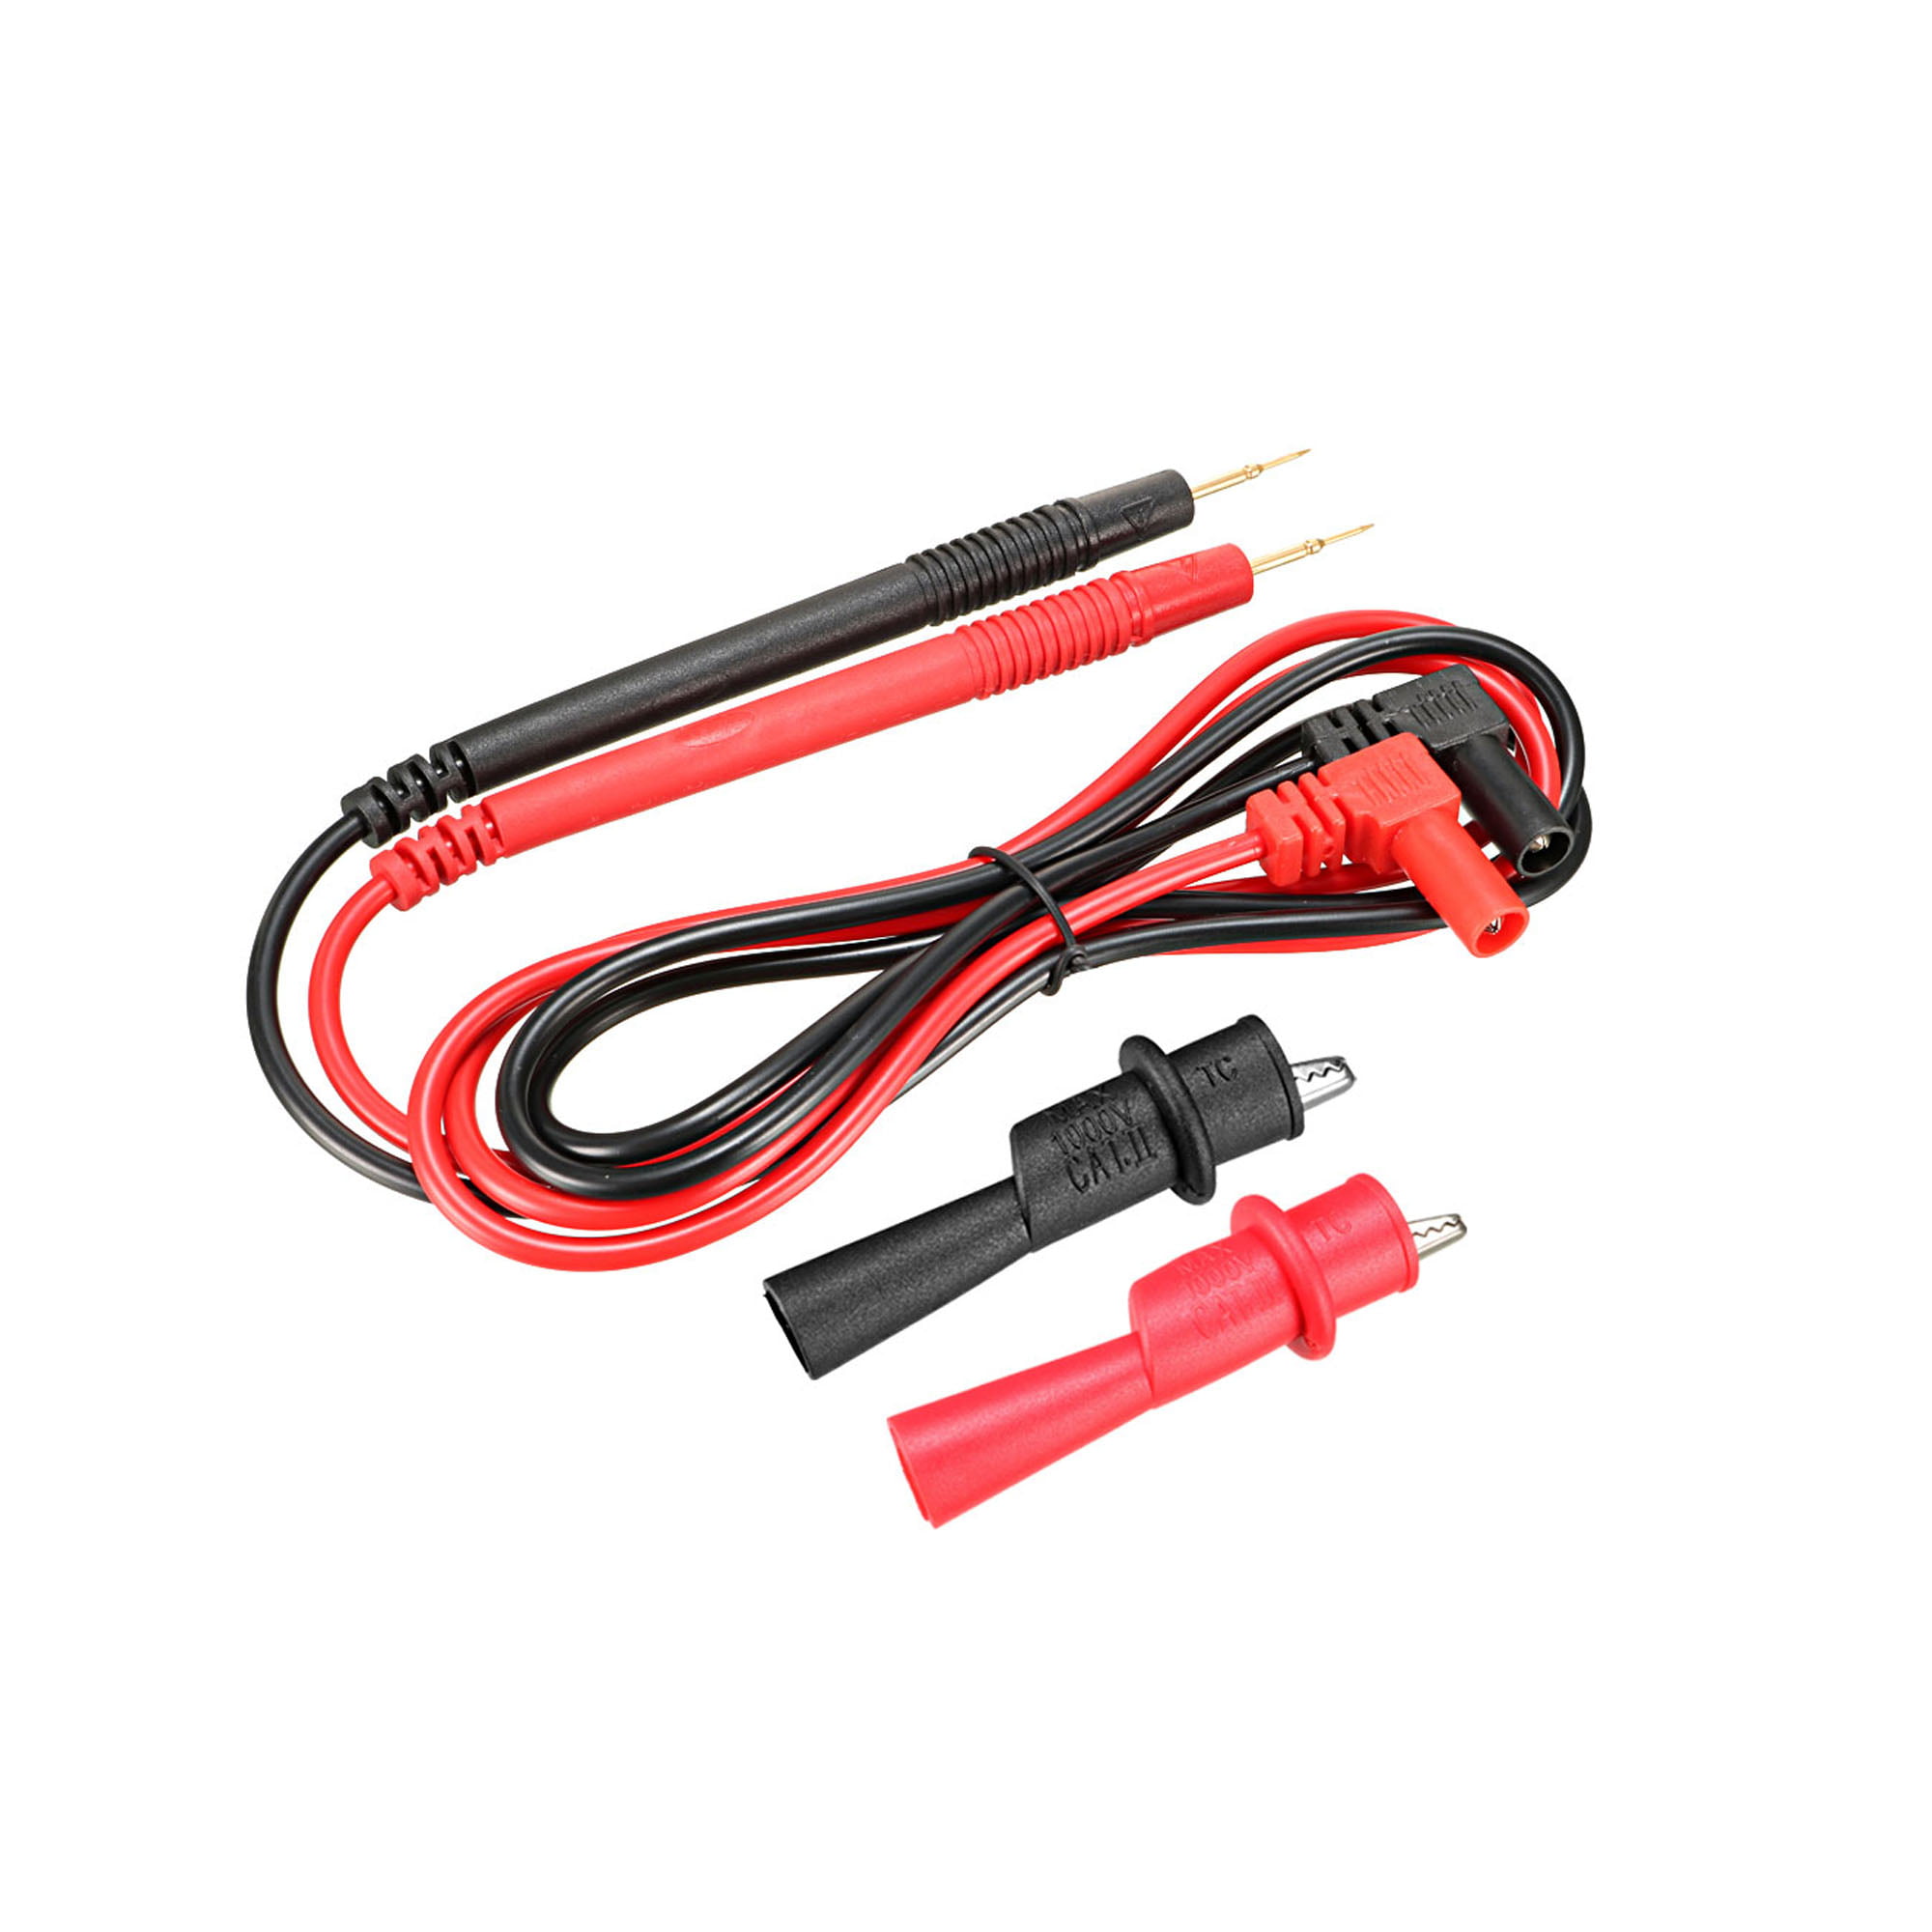 Hot 1 Pair Banana Plug To Test Hook Clip Probe Lead Cable For Multimeter 